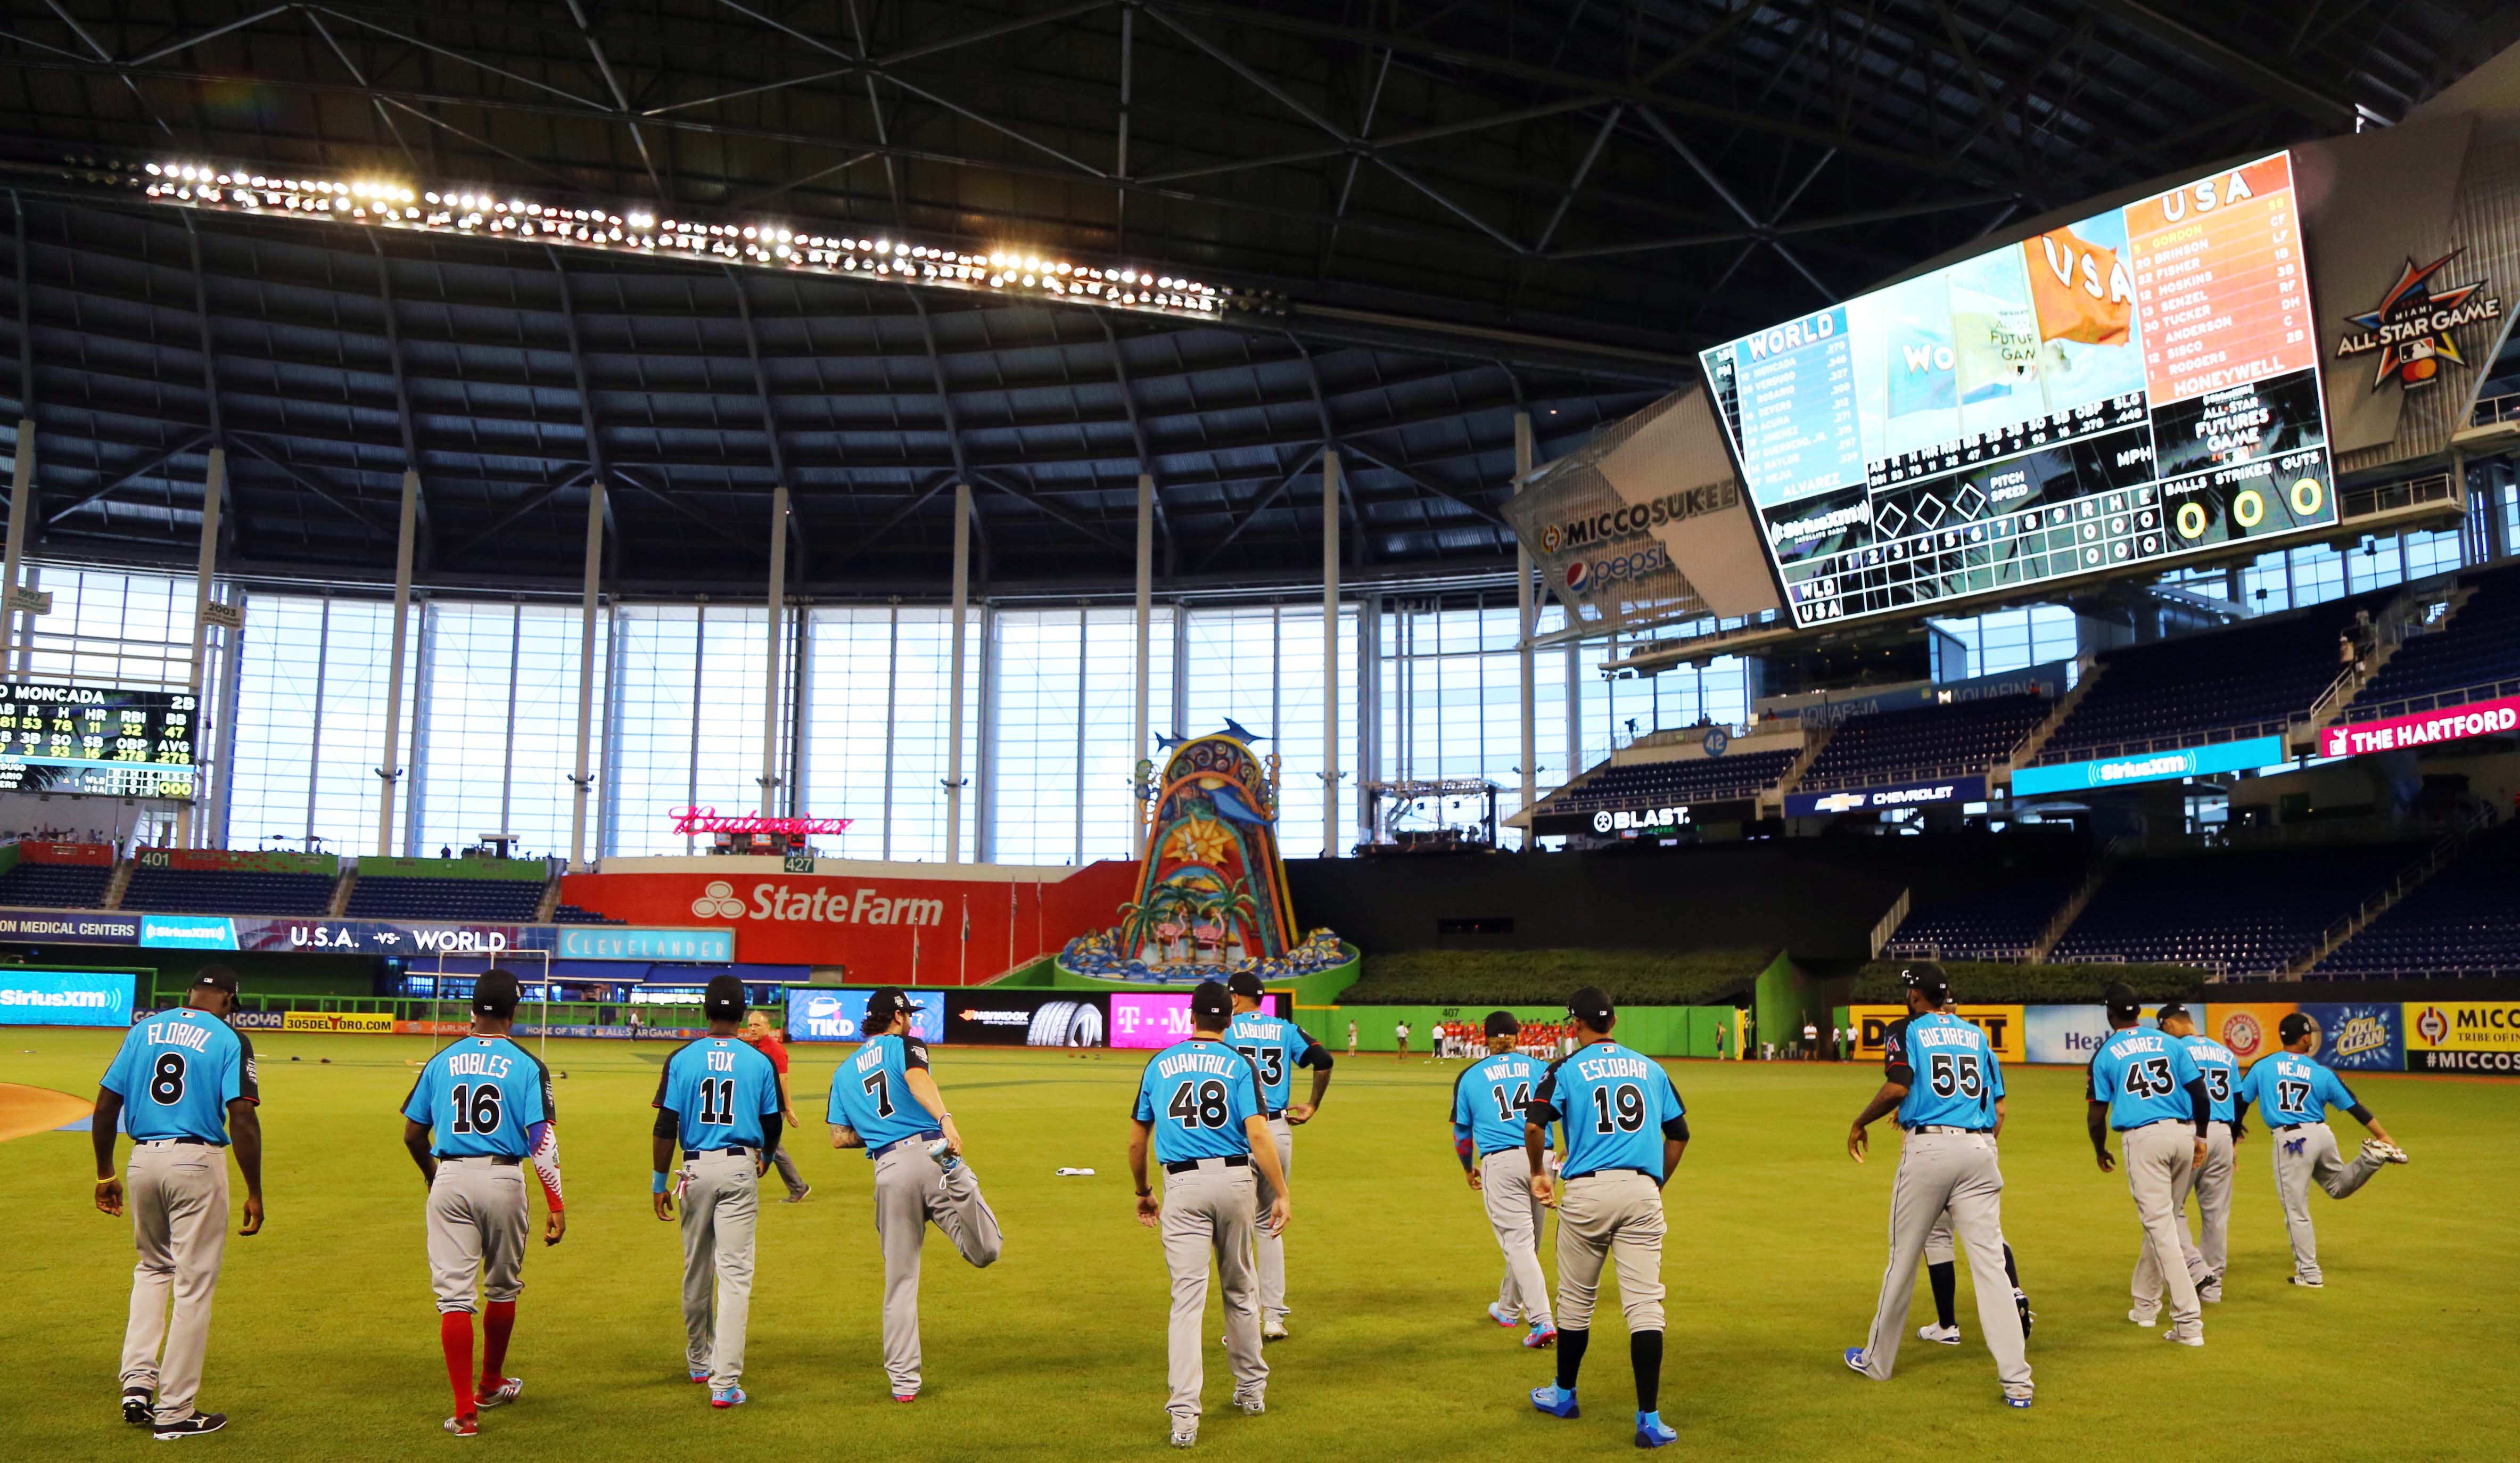 Miami's Publicly-Funded Ballpark Won't Make Marlins Owner Jeff Loria Richer